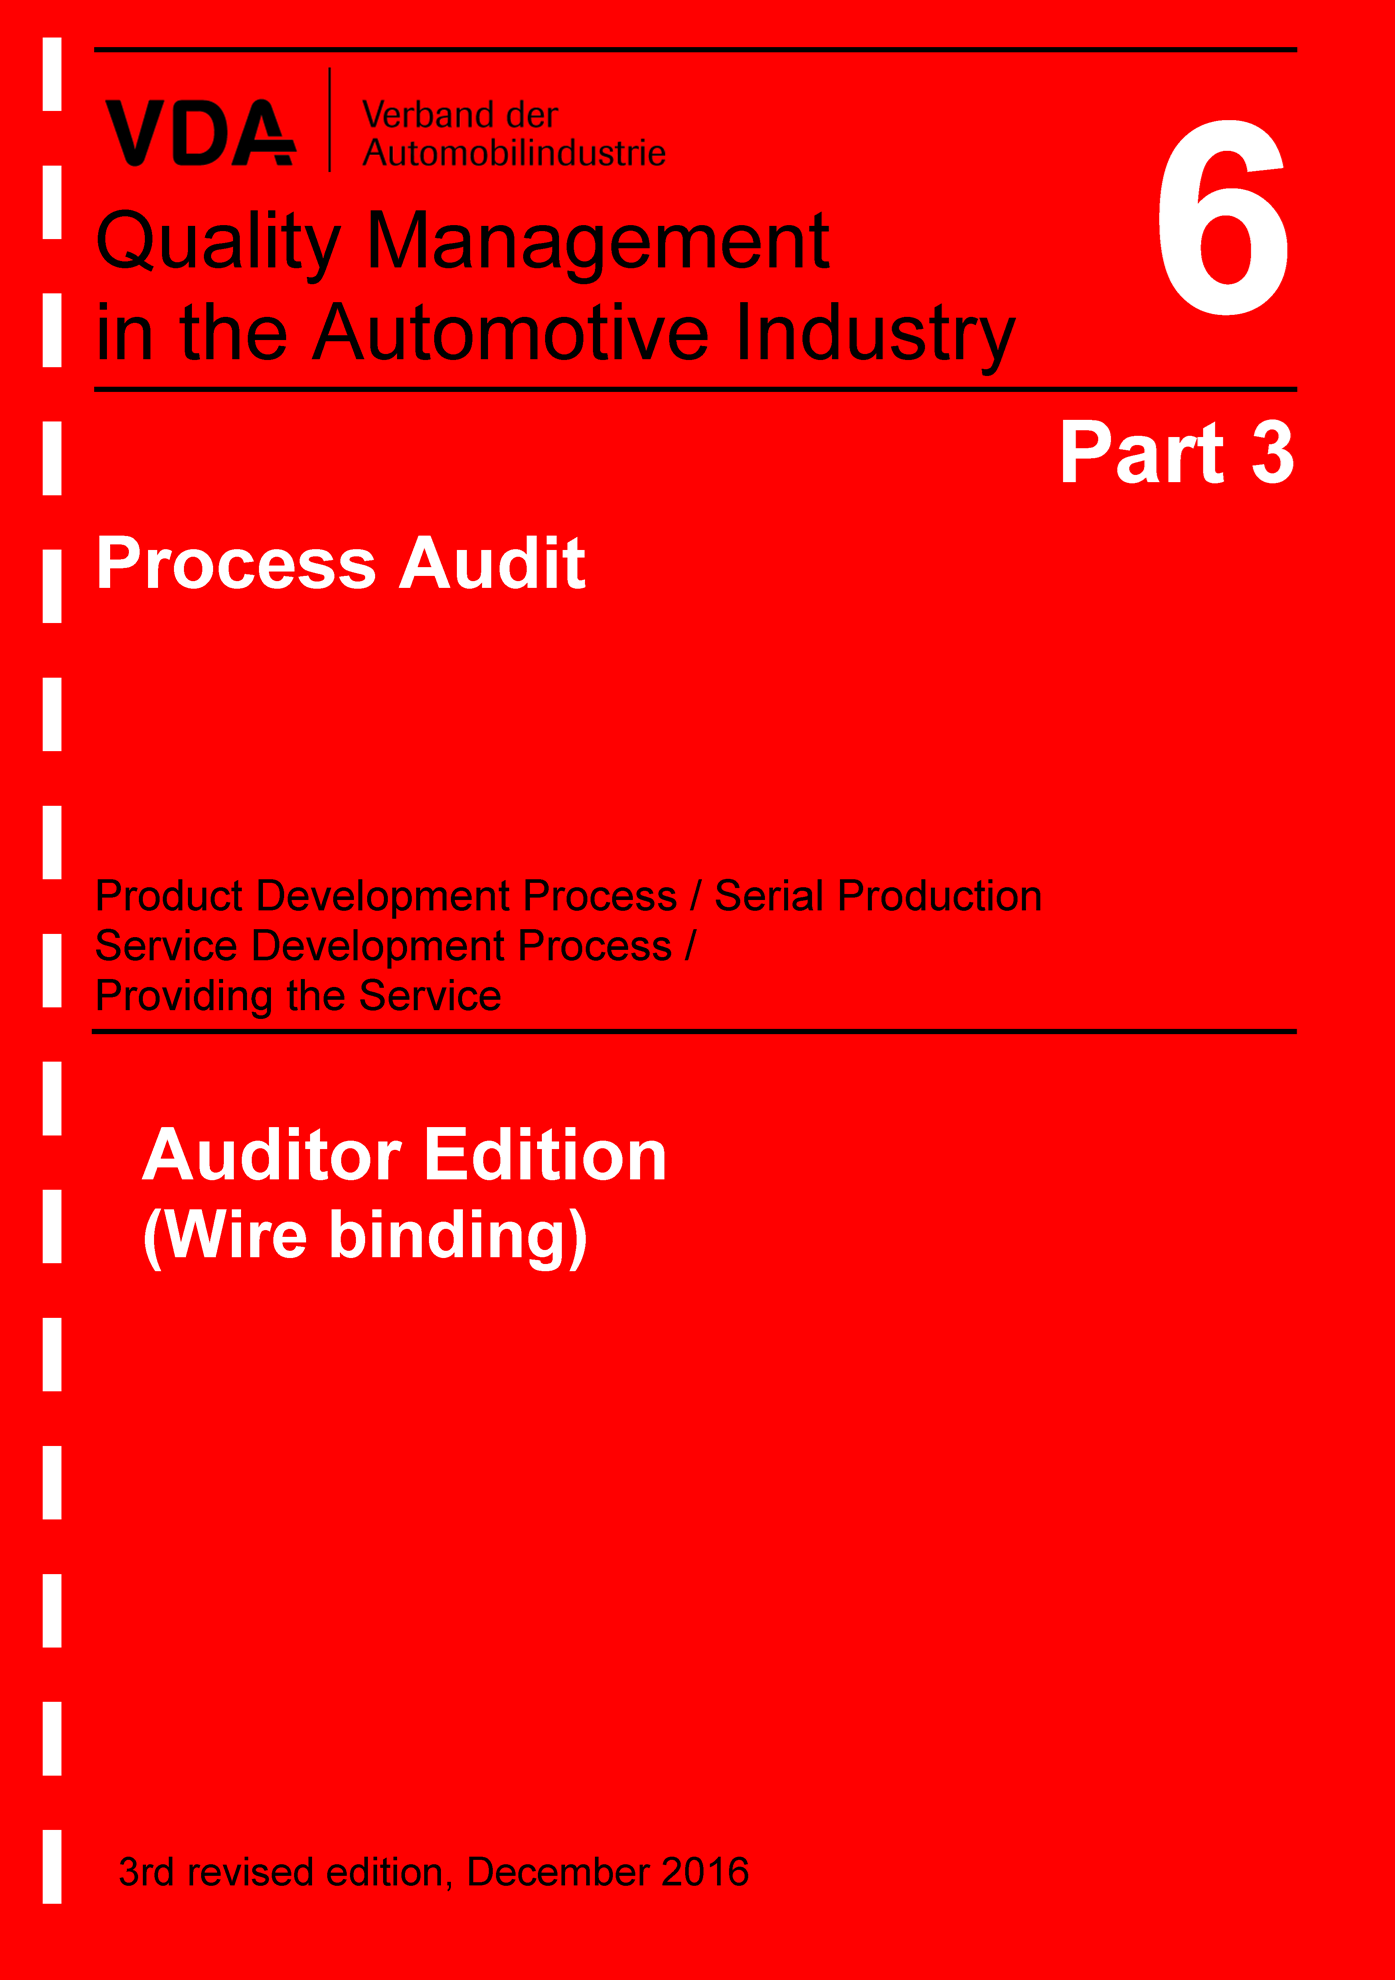 Picture of Volume 06 Part 3 - Auditor Edition, Edition 2016